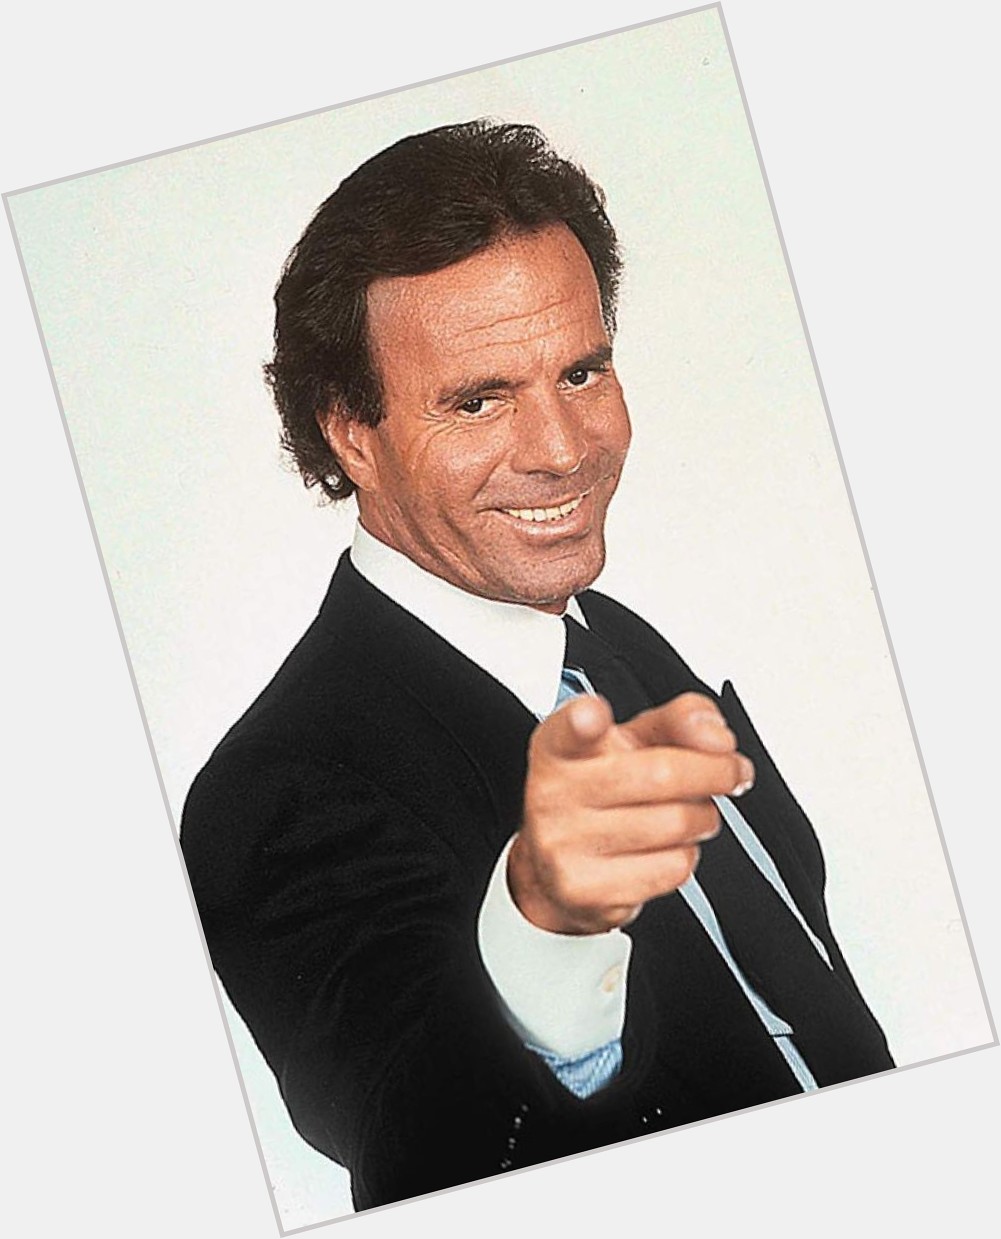 Happy birthday to Julio Iglesias! He picks Sophia up for a date in the show! 